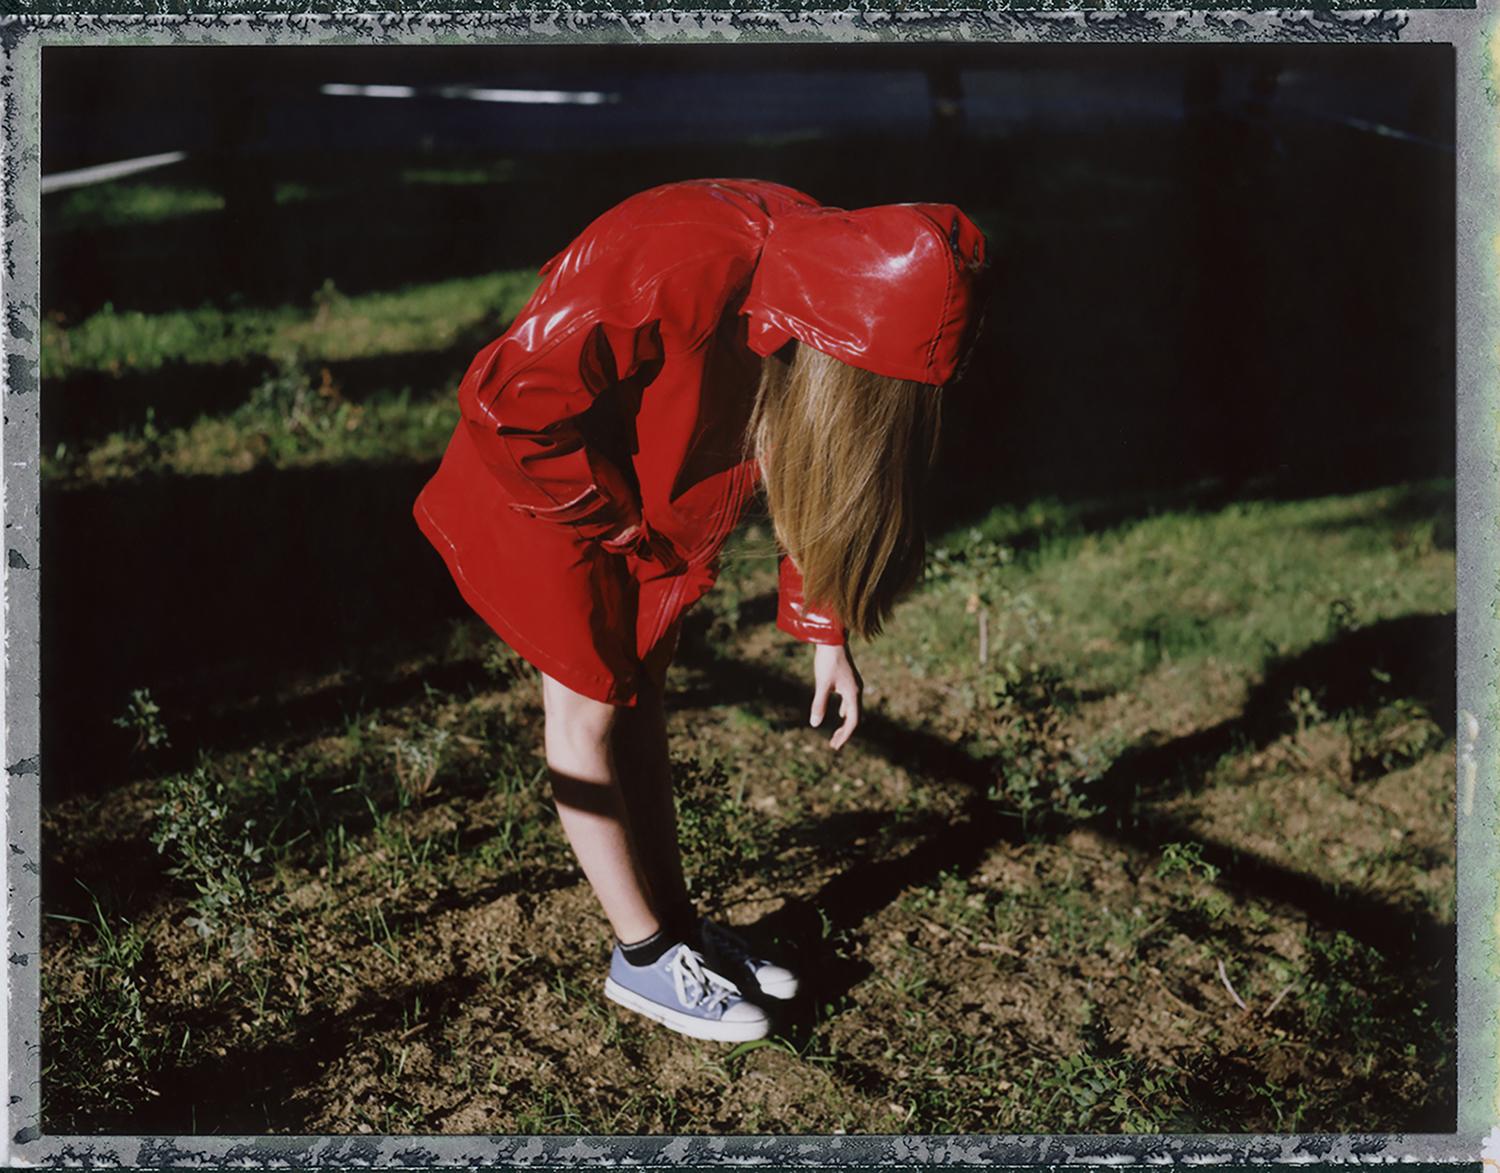 Cristina Fontsare Color Photograph - The hood is falling short  - Contemporary, Polaroid, Photograph, Youth